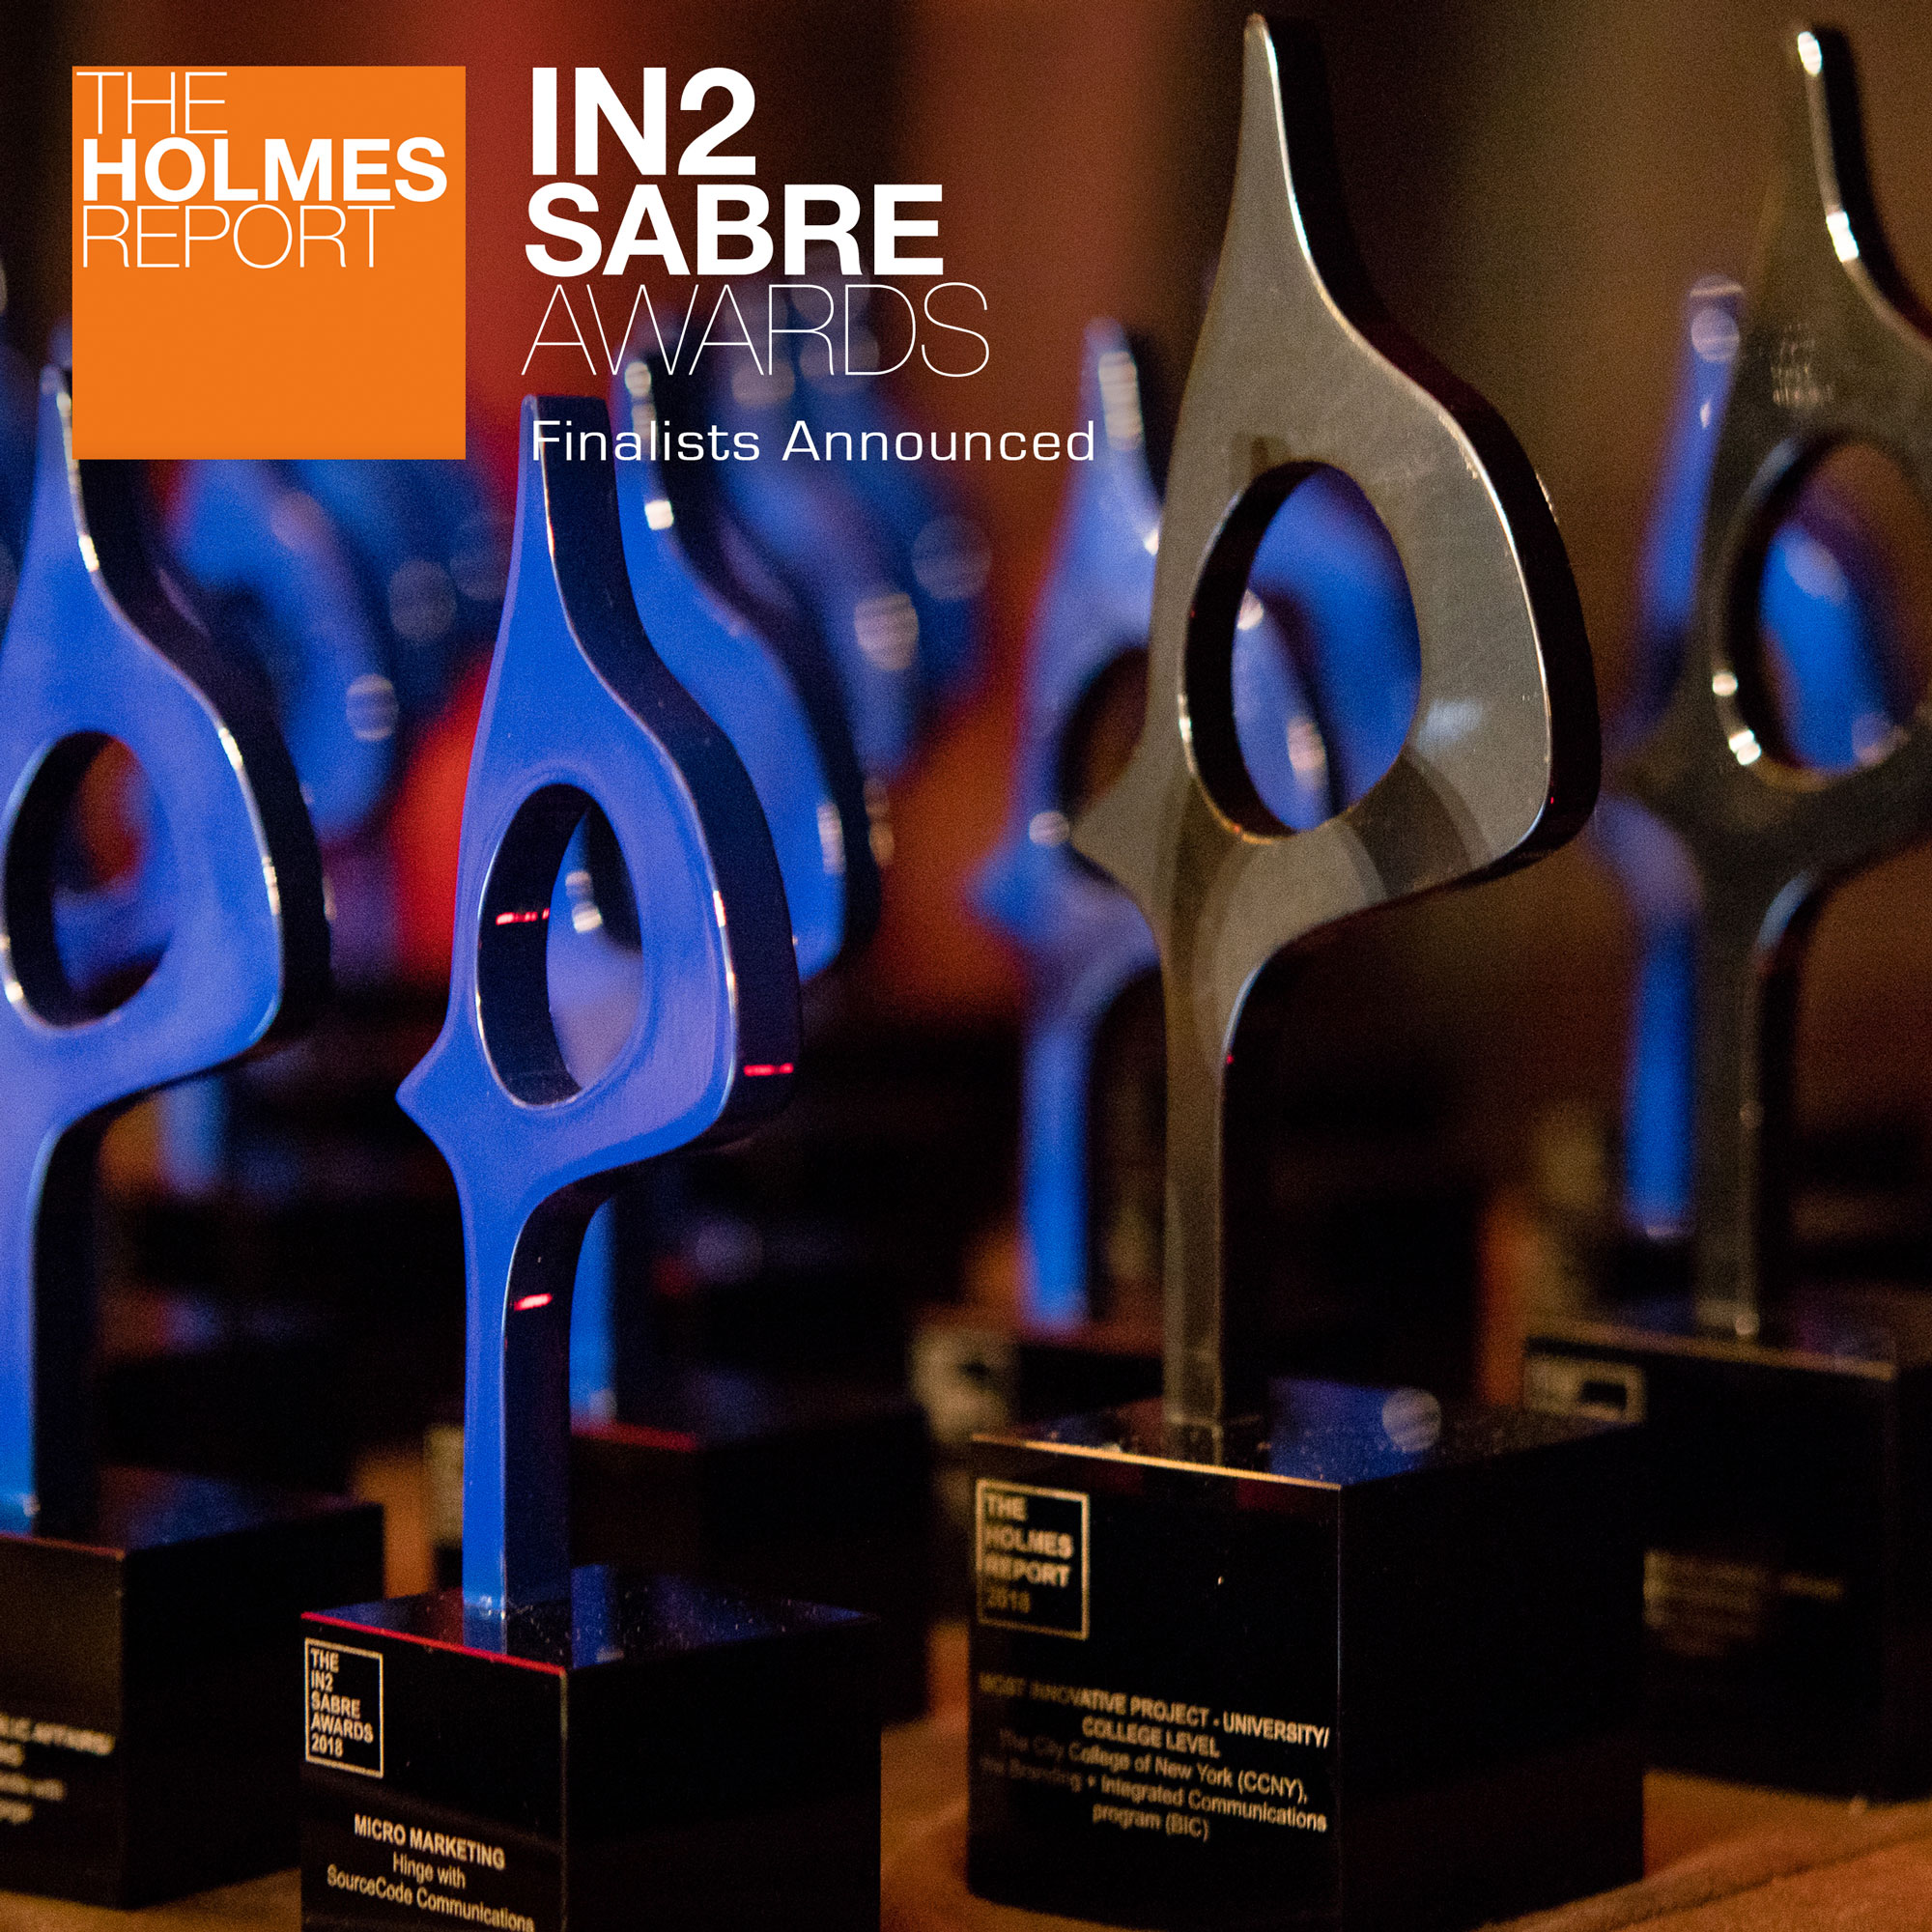 In2 SABRE Awards Finalists